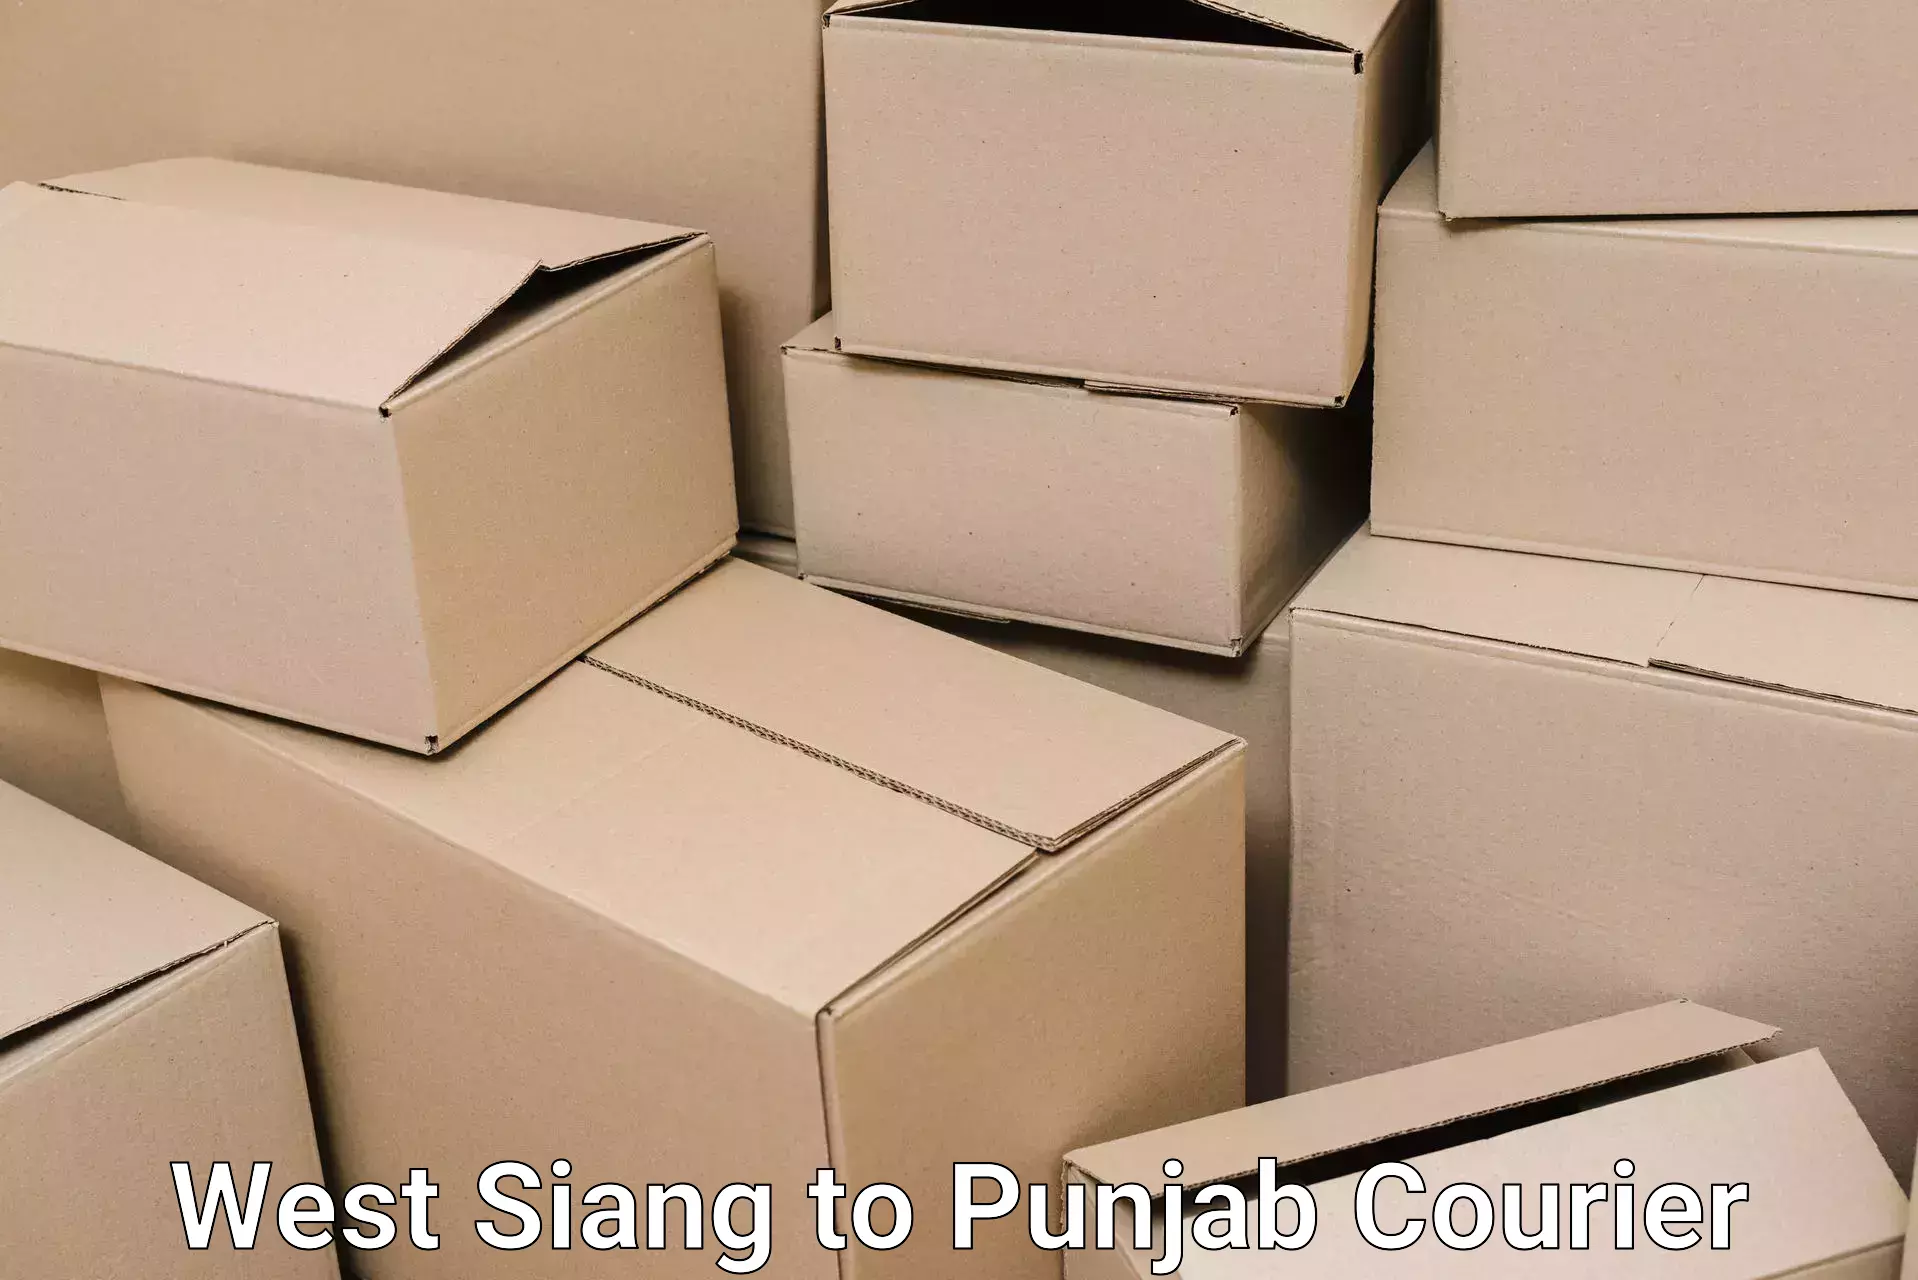 Advanced relocation solutions West Siang to Punjab